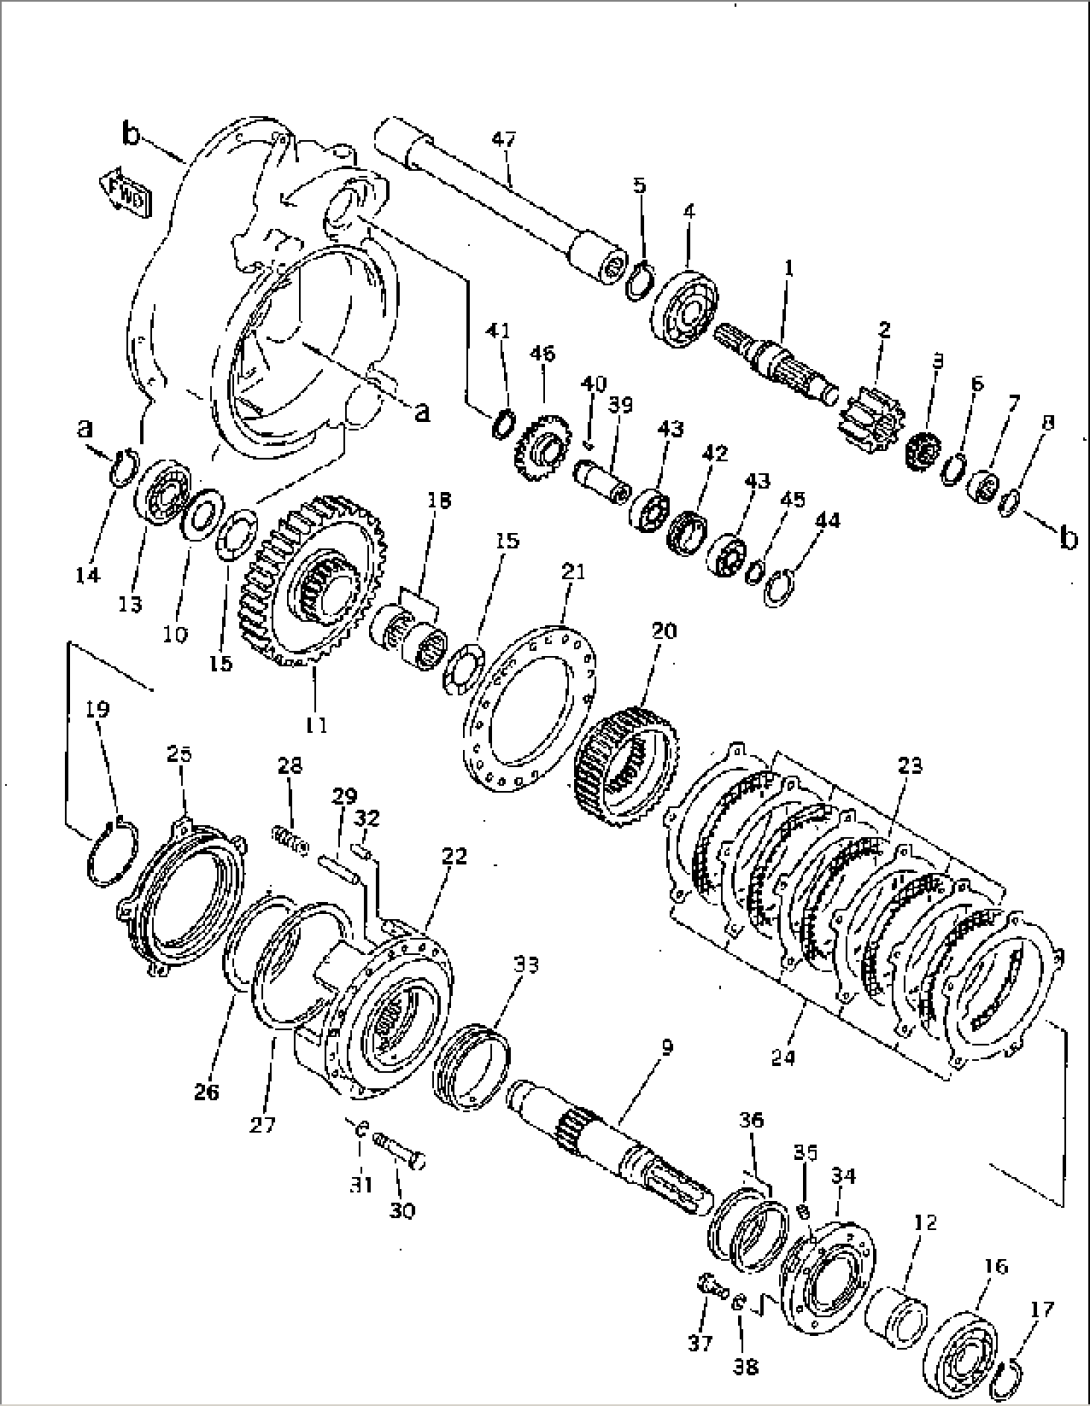 P.T.O. SHAFT AND GEAR